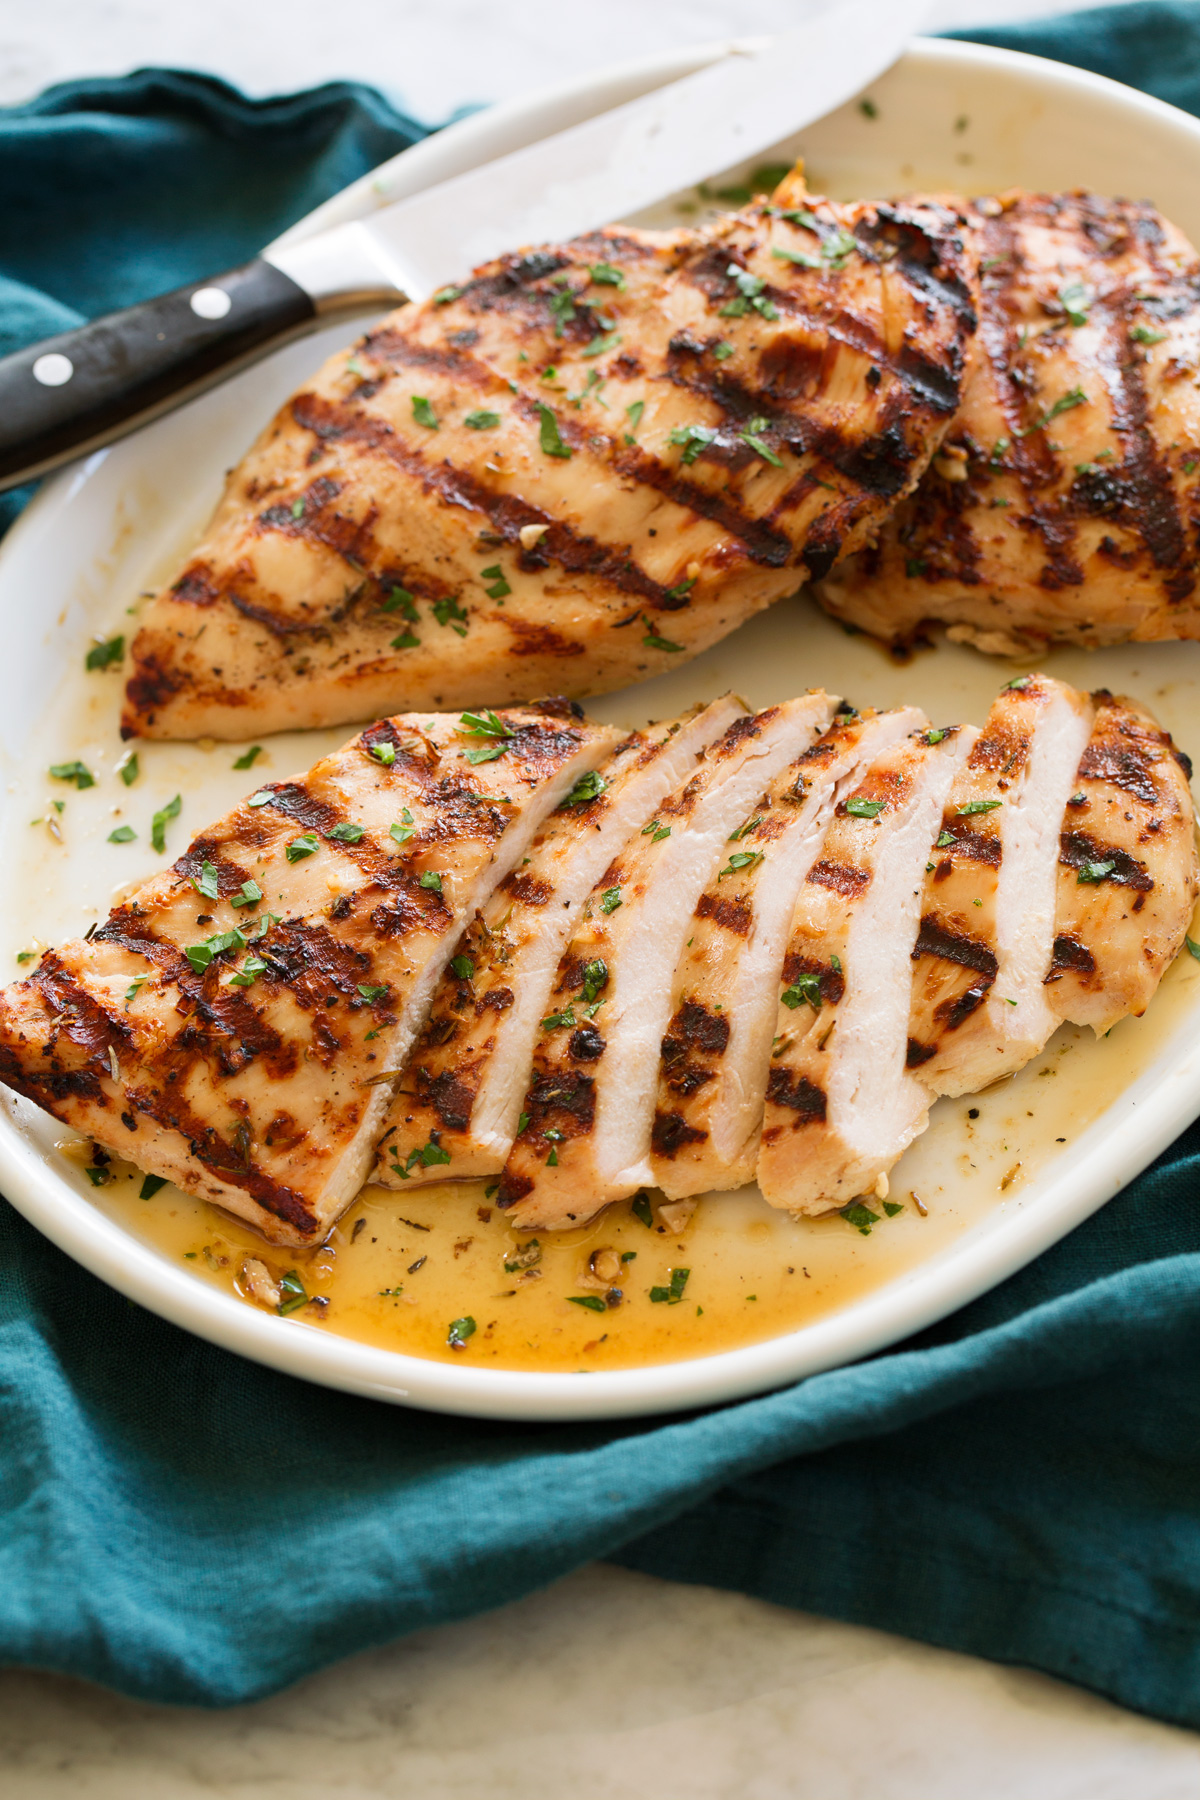 Sliced grilled chicken breasts showing juicy interior.